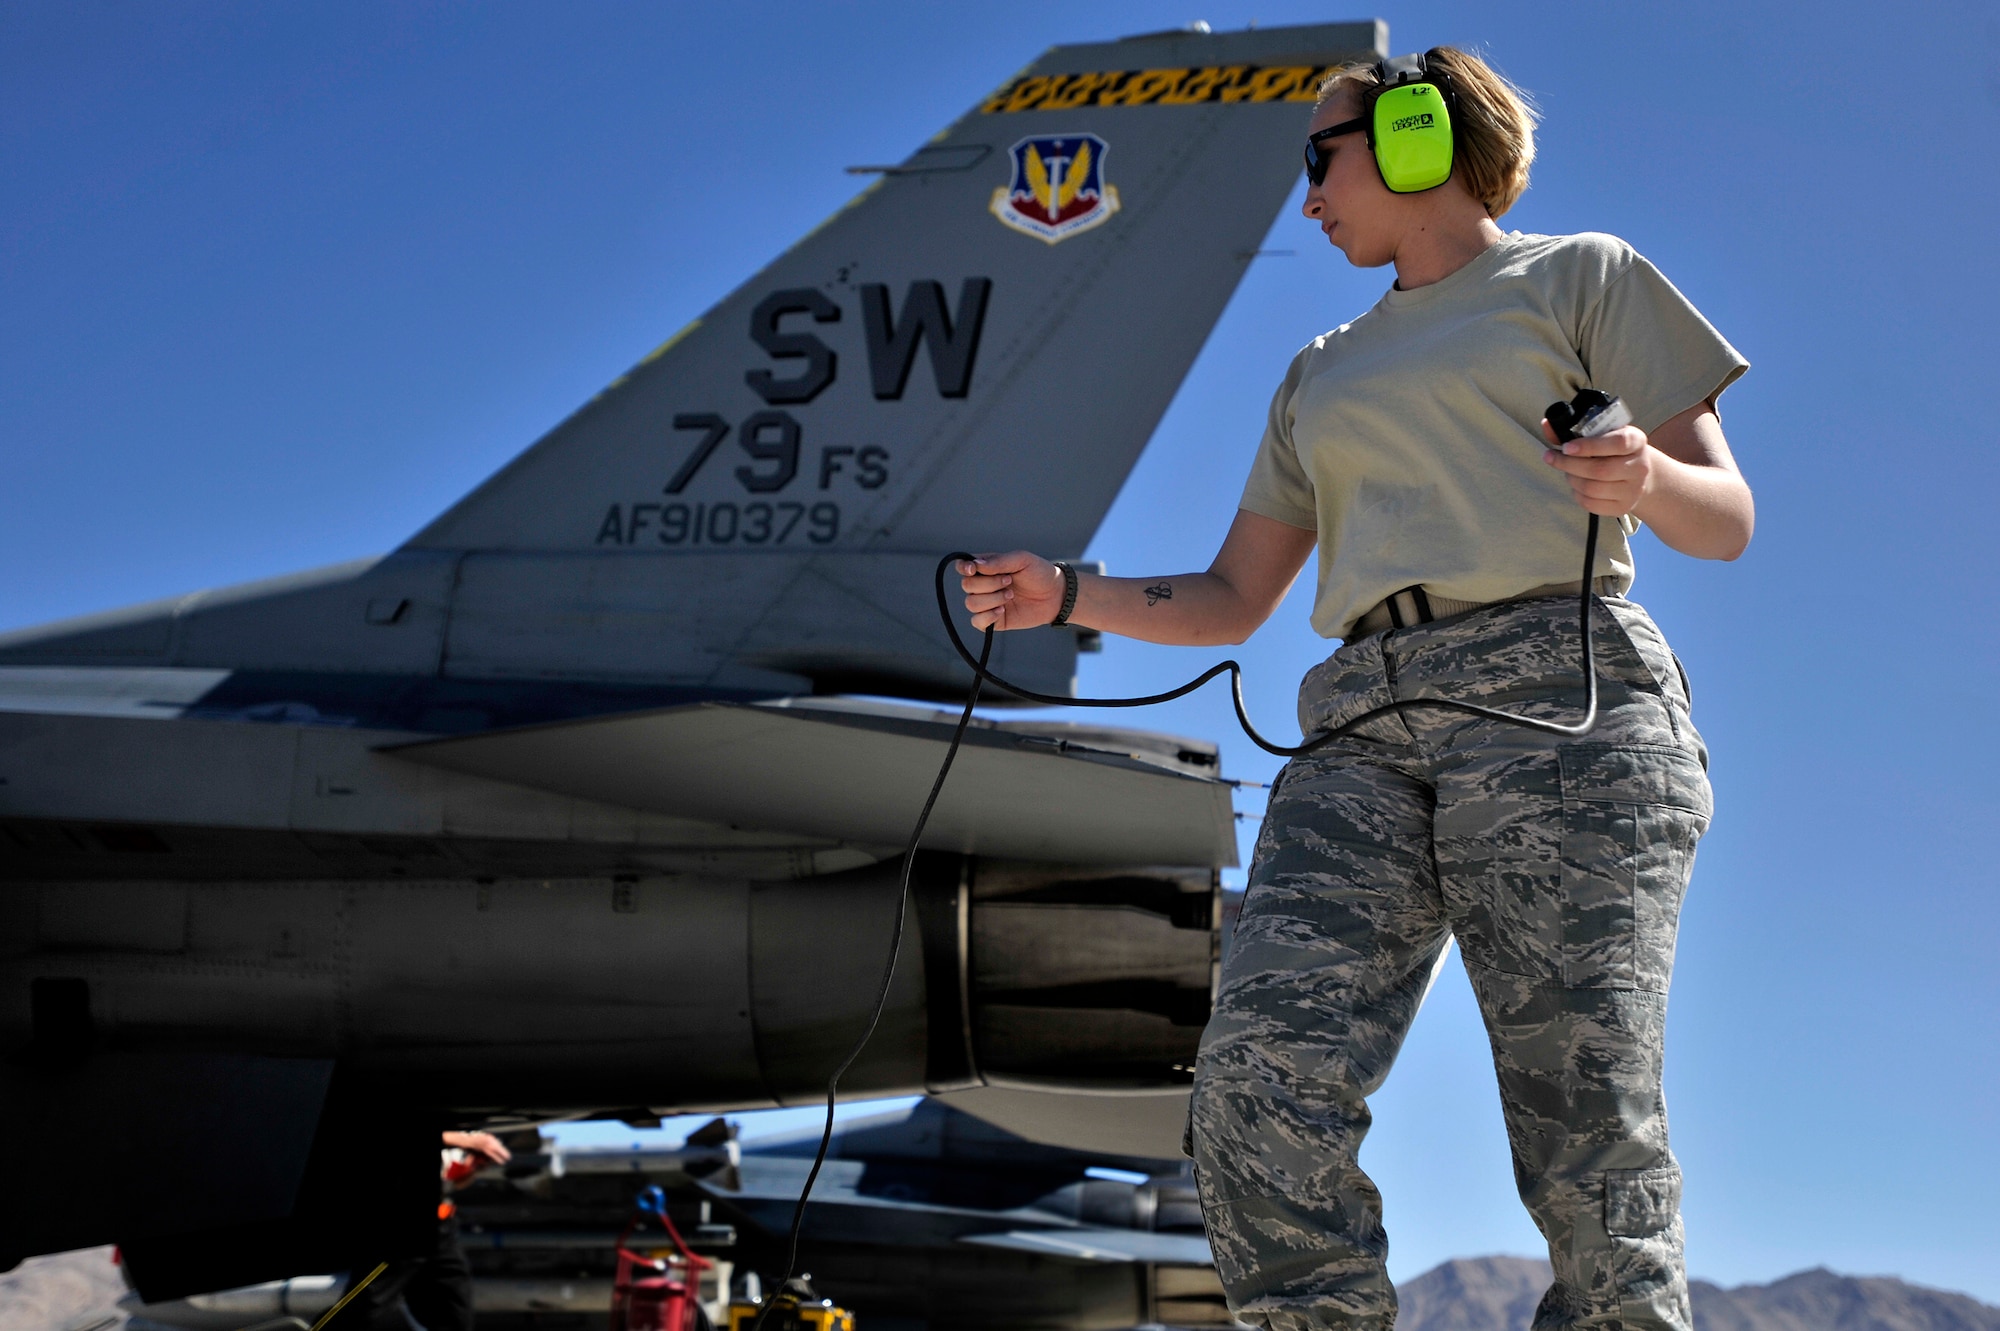 U.S. Air Force Staff Sgt. Elizabeth Tyburski, 20th Communications Squadron client service technician, hooks up her communication cord so she is able to talk to 1st Lt. Phill Wilson, 79th Fighter Squadron pilot, prior to him taking off during Red Flag 13-3, March 12, 2013, Nellis Air Force Base, Nev. Tyburski received the rare opportunity to launch an F-16 and experienced what it’s like to be a crew chief. (U.S. Air Force photo by Staff Sgt. Kenny Holston/Released)